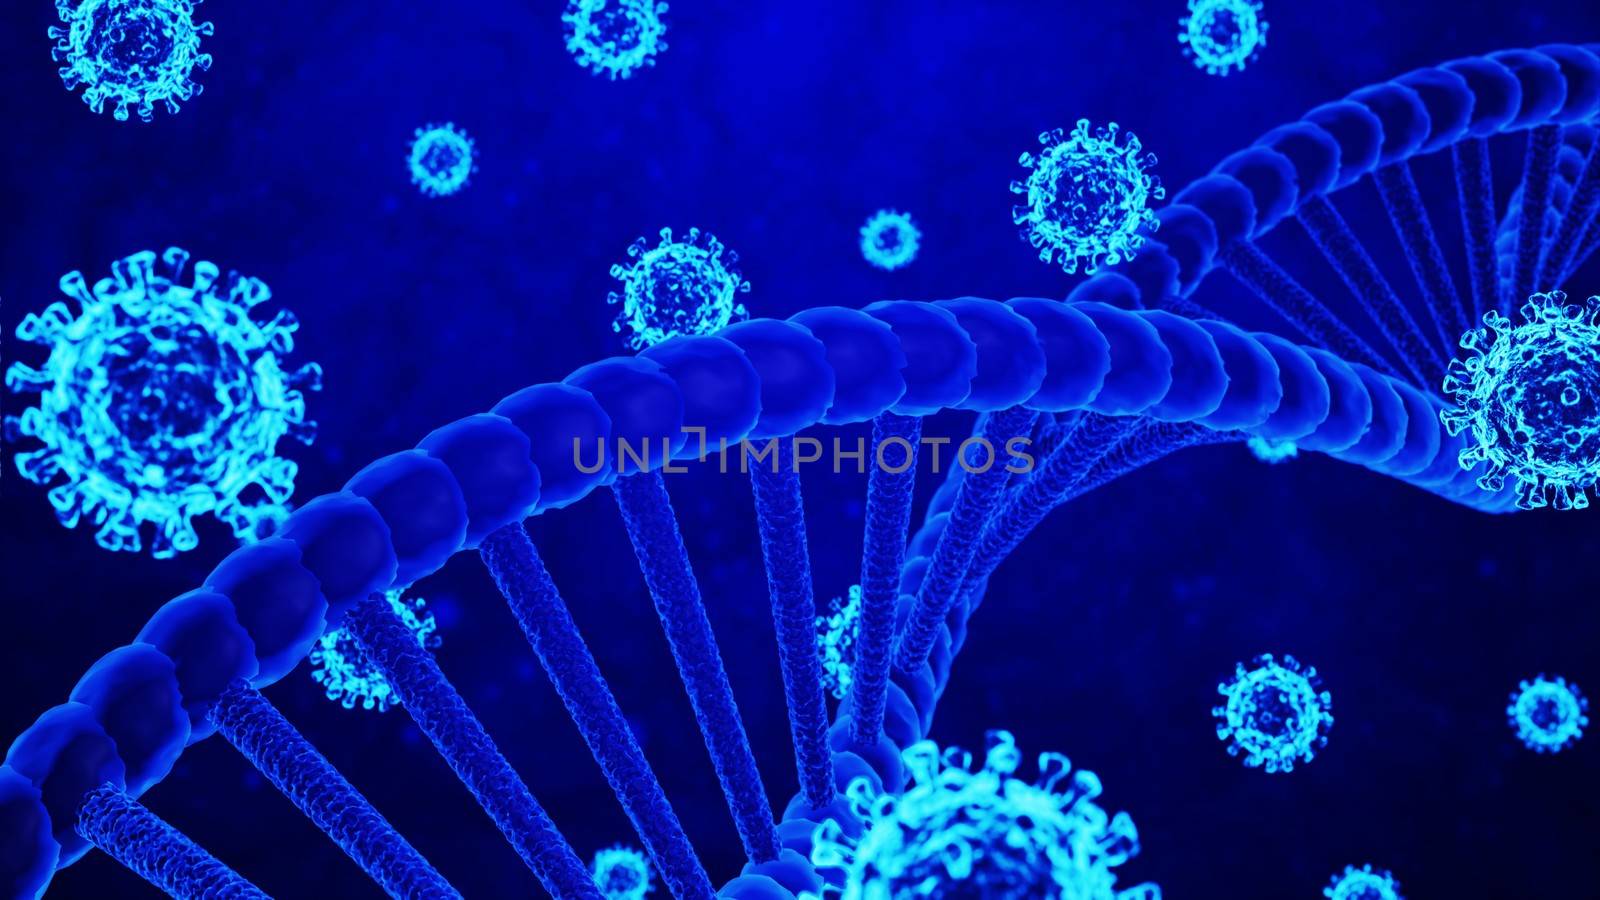 3D Rendering Coronavirus/COVID-19 and DNA Helix Models Rotating in Abstract Moving Blue Background and Particles Still Image